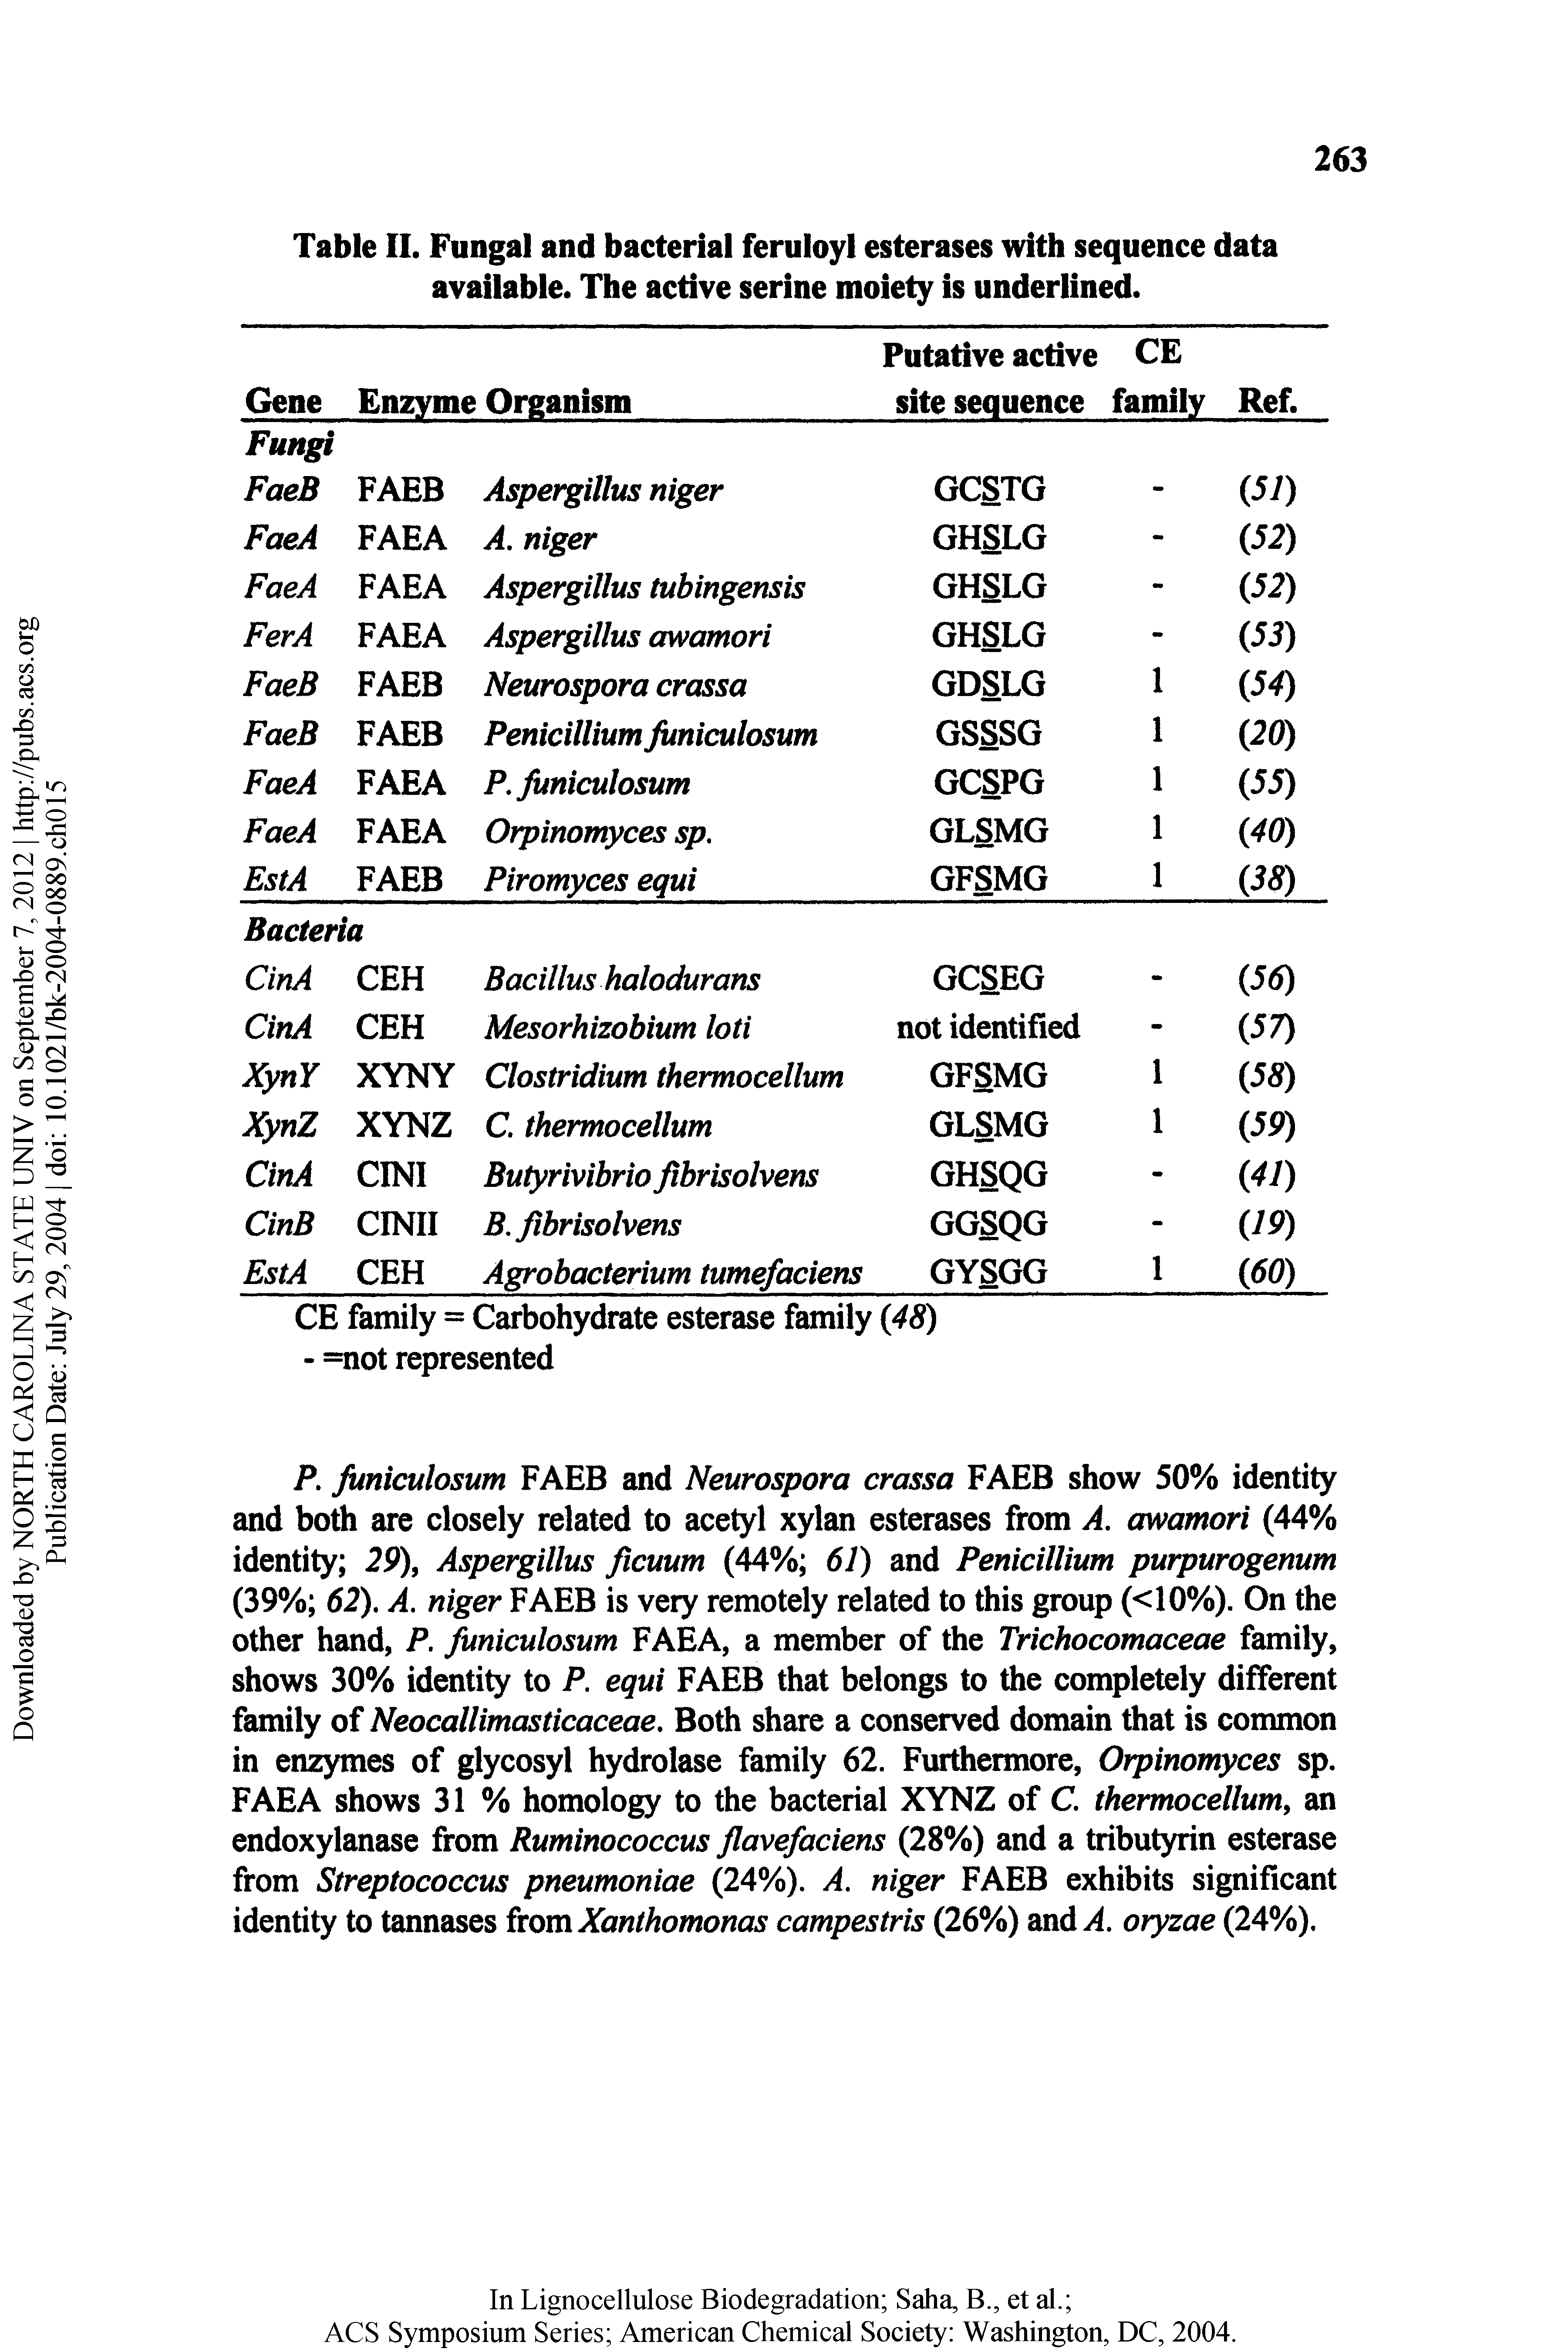 Table II. Fungal and bacterial feruloyl esterases with sequence data available. The active serine moiety is underlined.